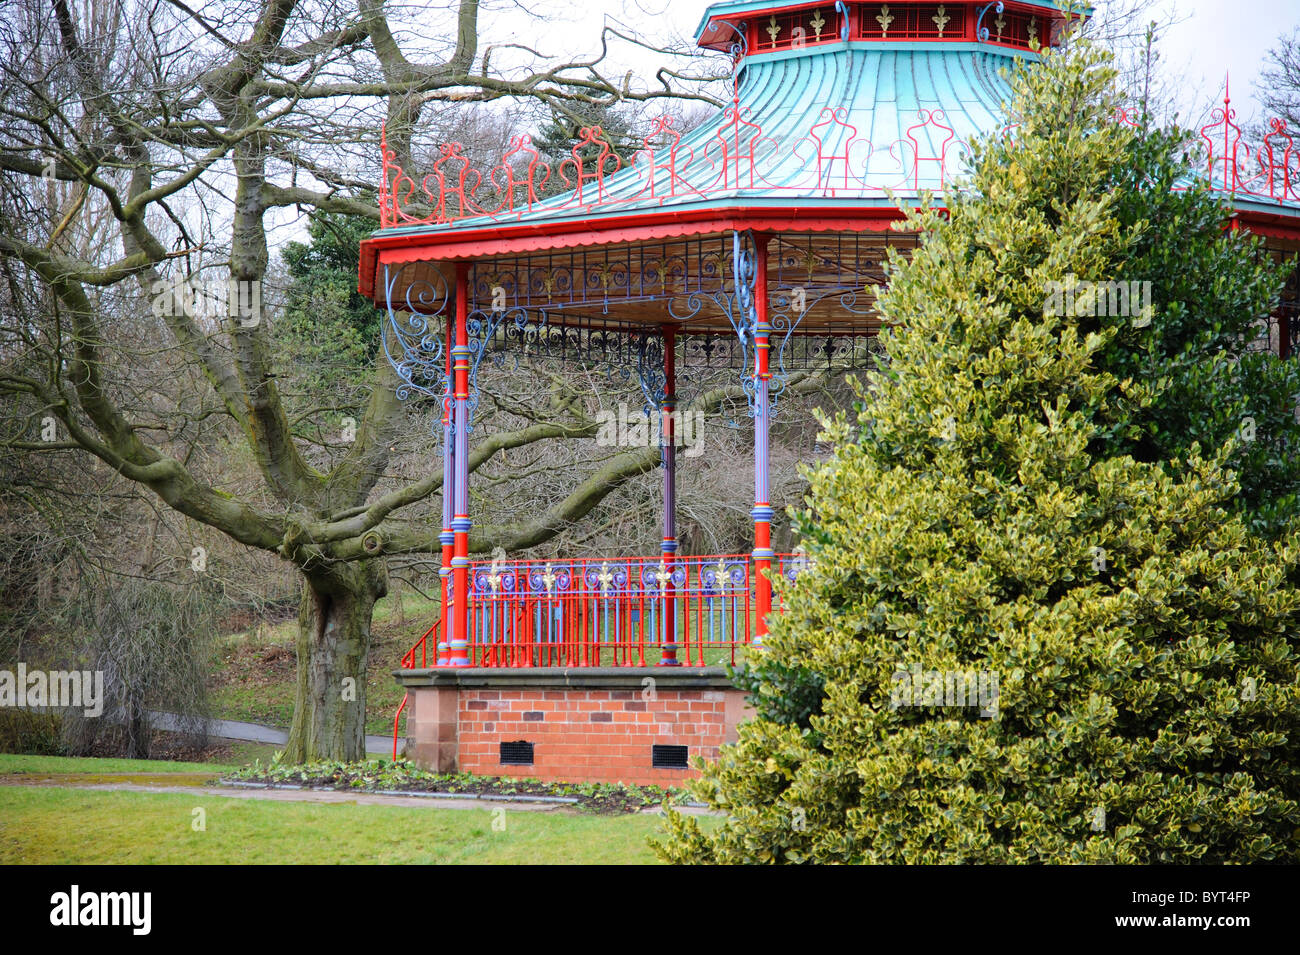 Colourful bandstand in Sefton Park, Liverpool Stock Photo